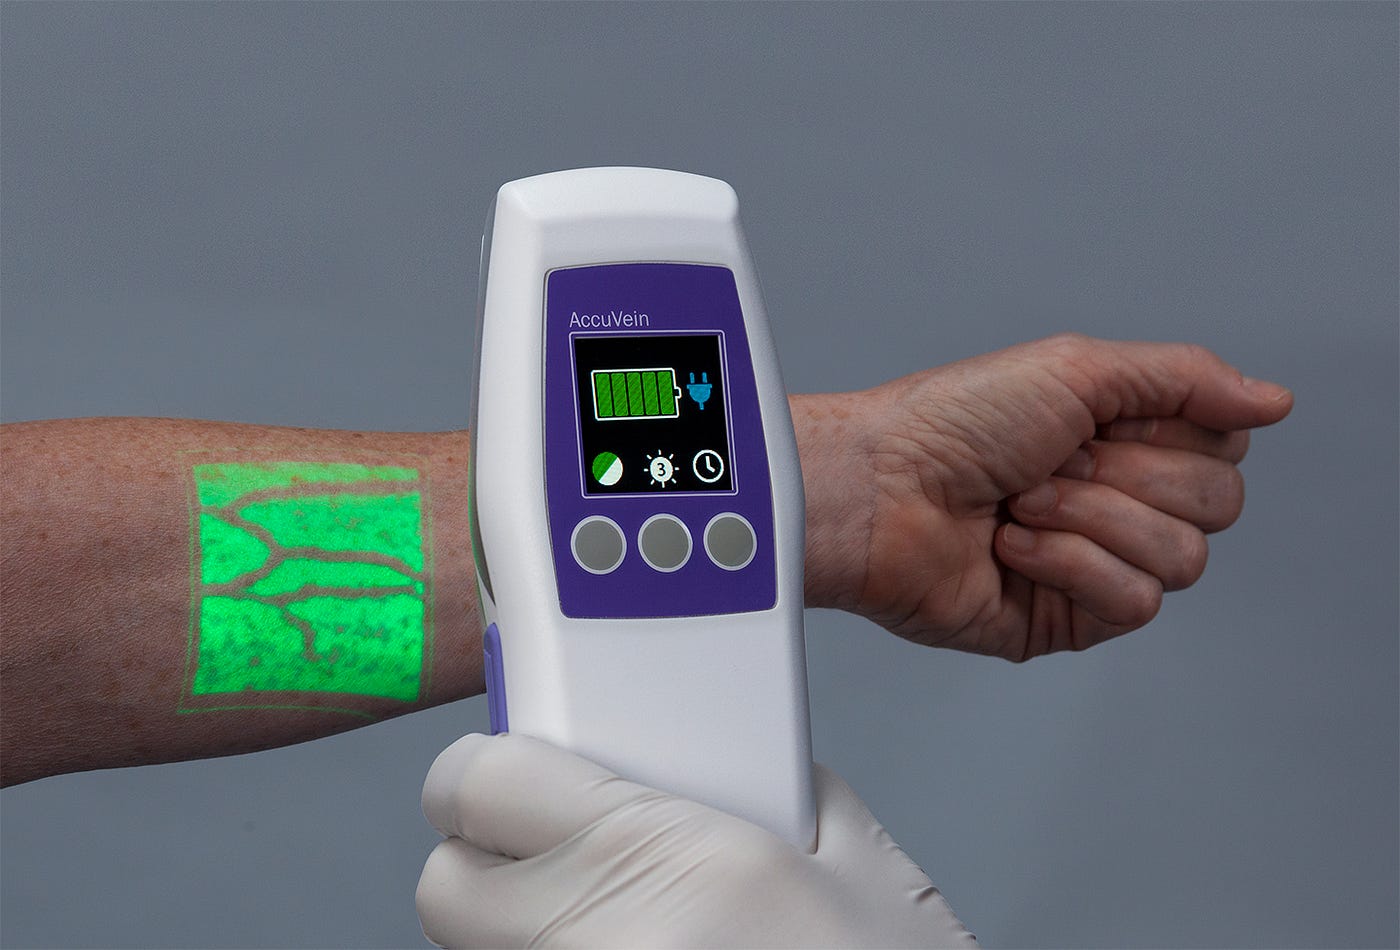 Photo of Accuvein device. XR technology like Accuvein can help nurses find veins easily on the patient. Approximately 40% of IV injections miss their target on the first stick.